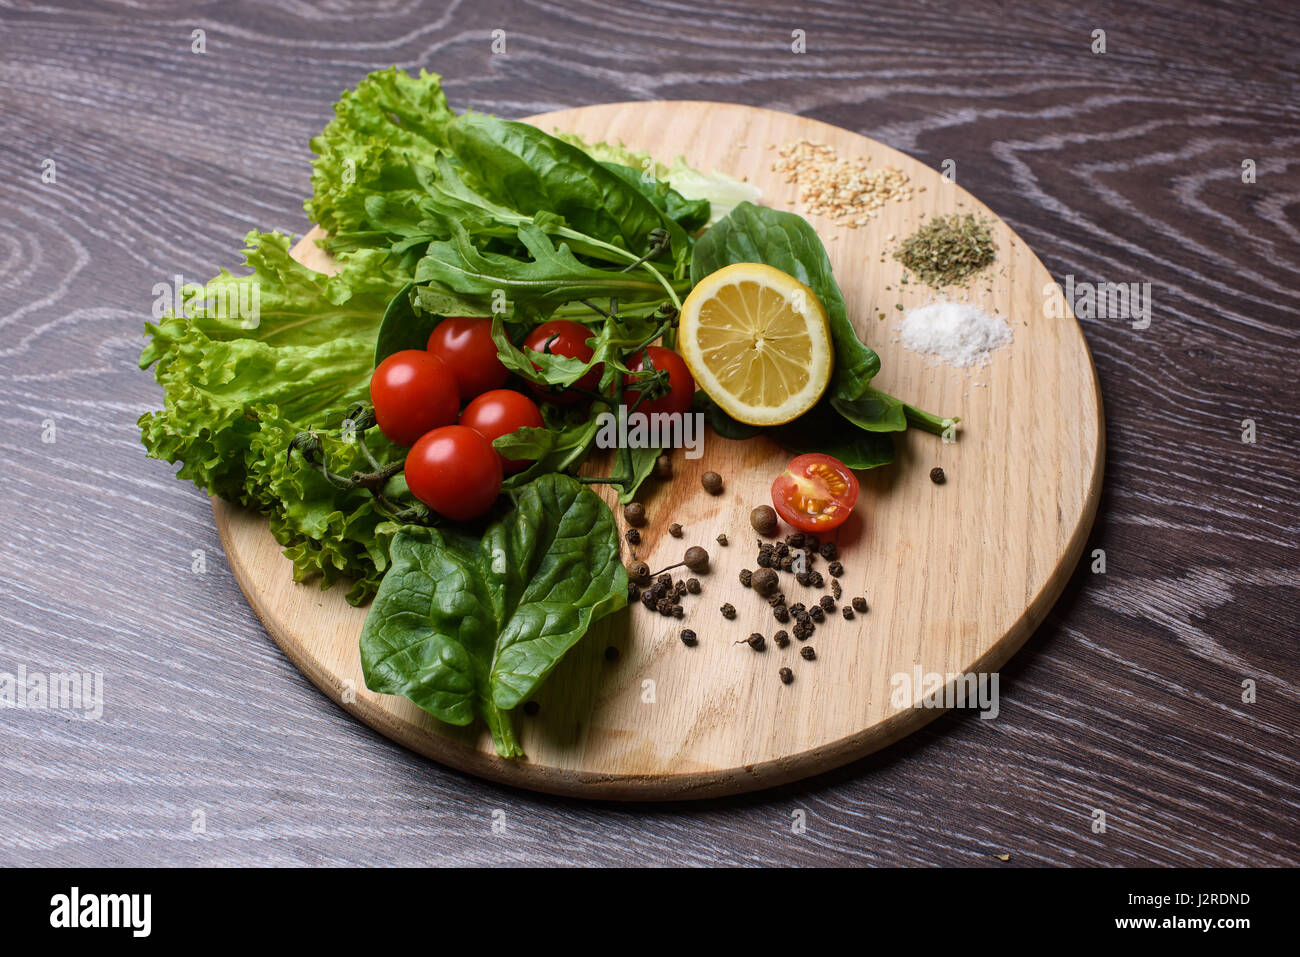 Ingredients for cooking on a wooden chopping board. Stock Photo